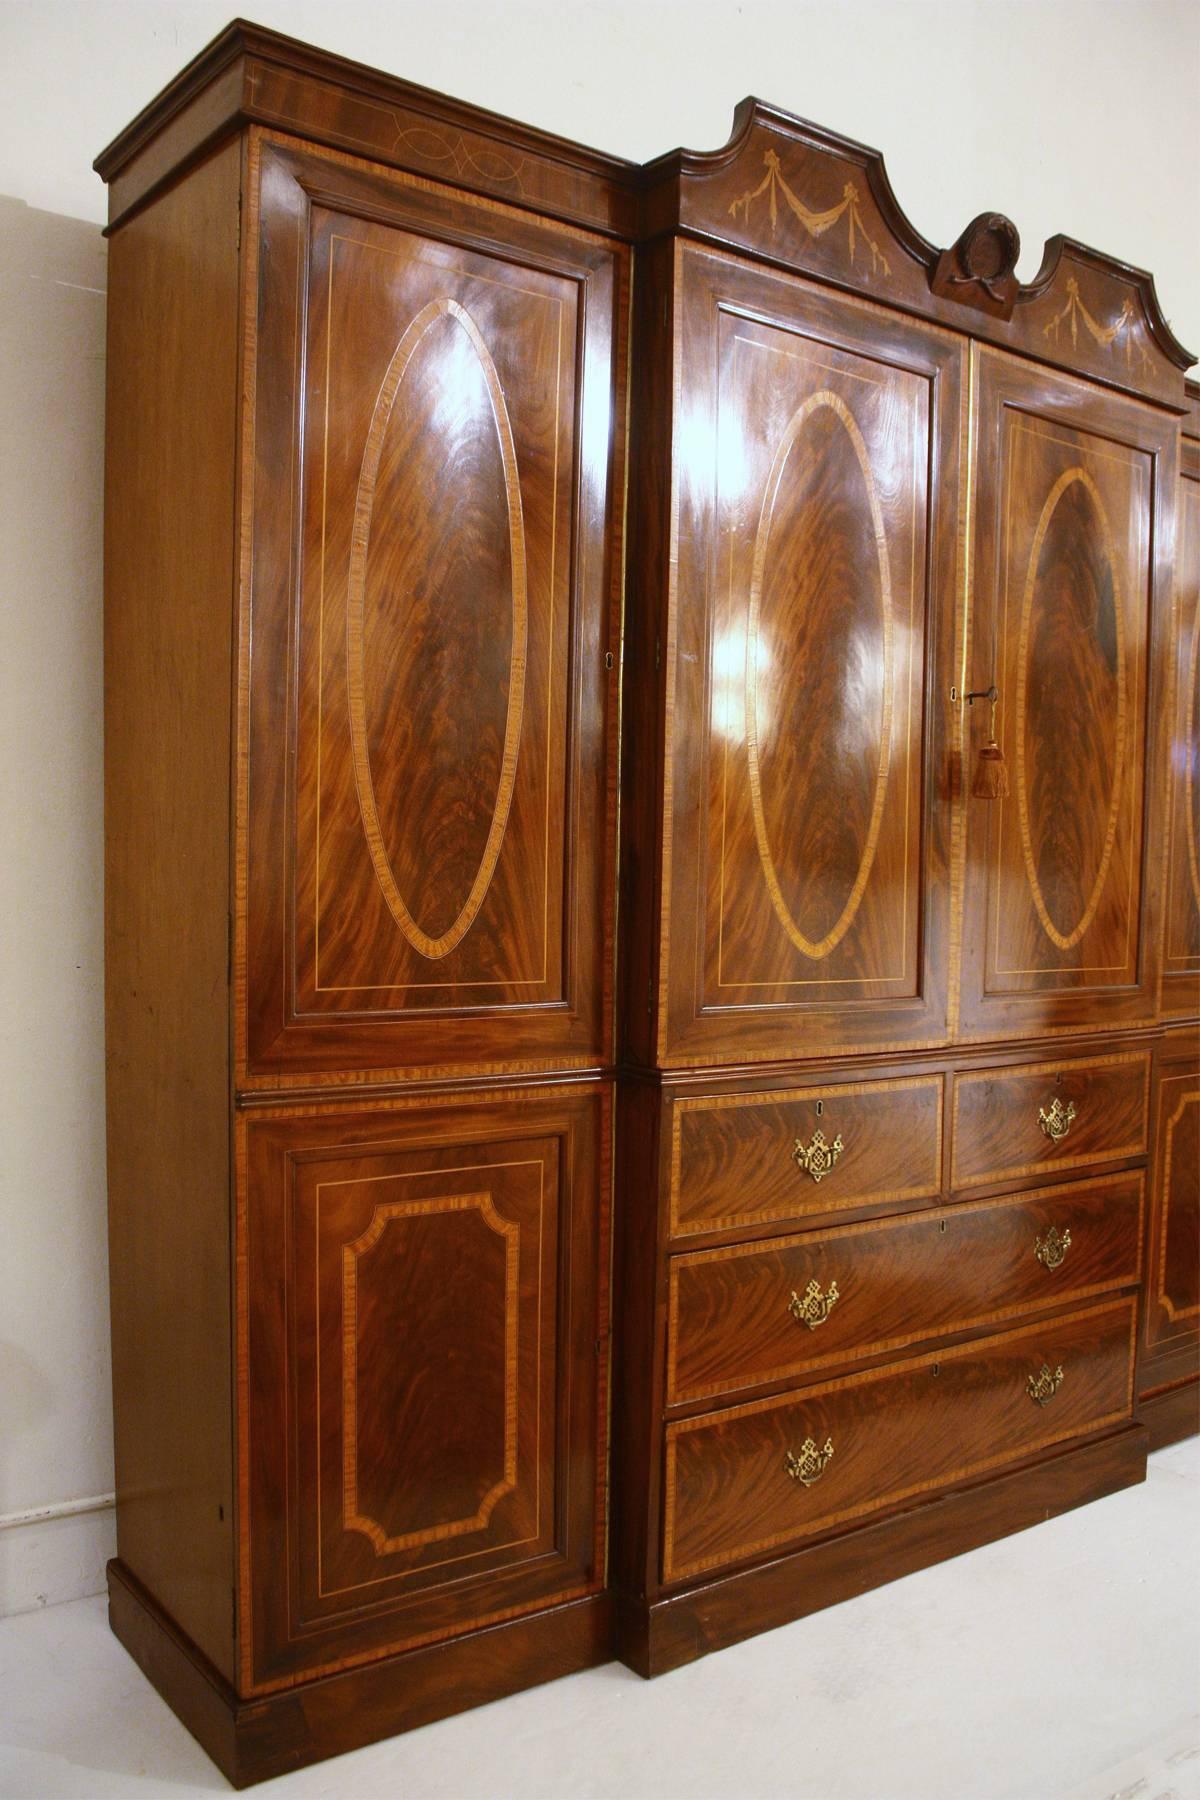 A stunning quality Georgian Revival breakfront mahogany gentleman’s wardrobe/press. The cornice having a broken pediment with a craved laurel wreath in center and two inlaid garland motifs. The central twin doors opening to reveal five oak dressing